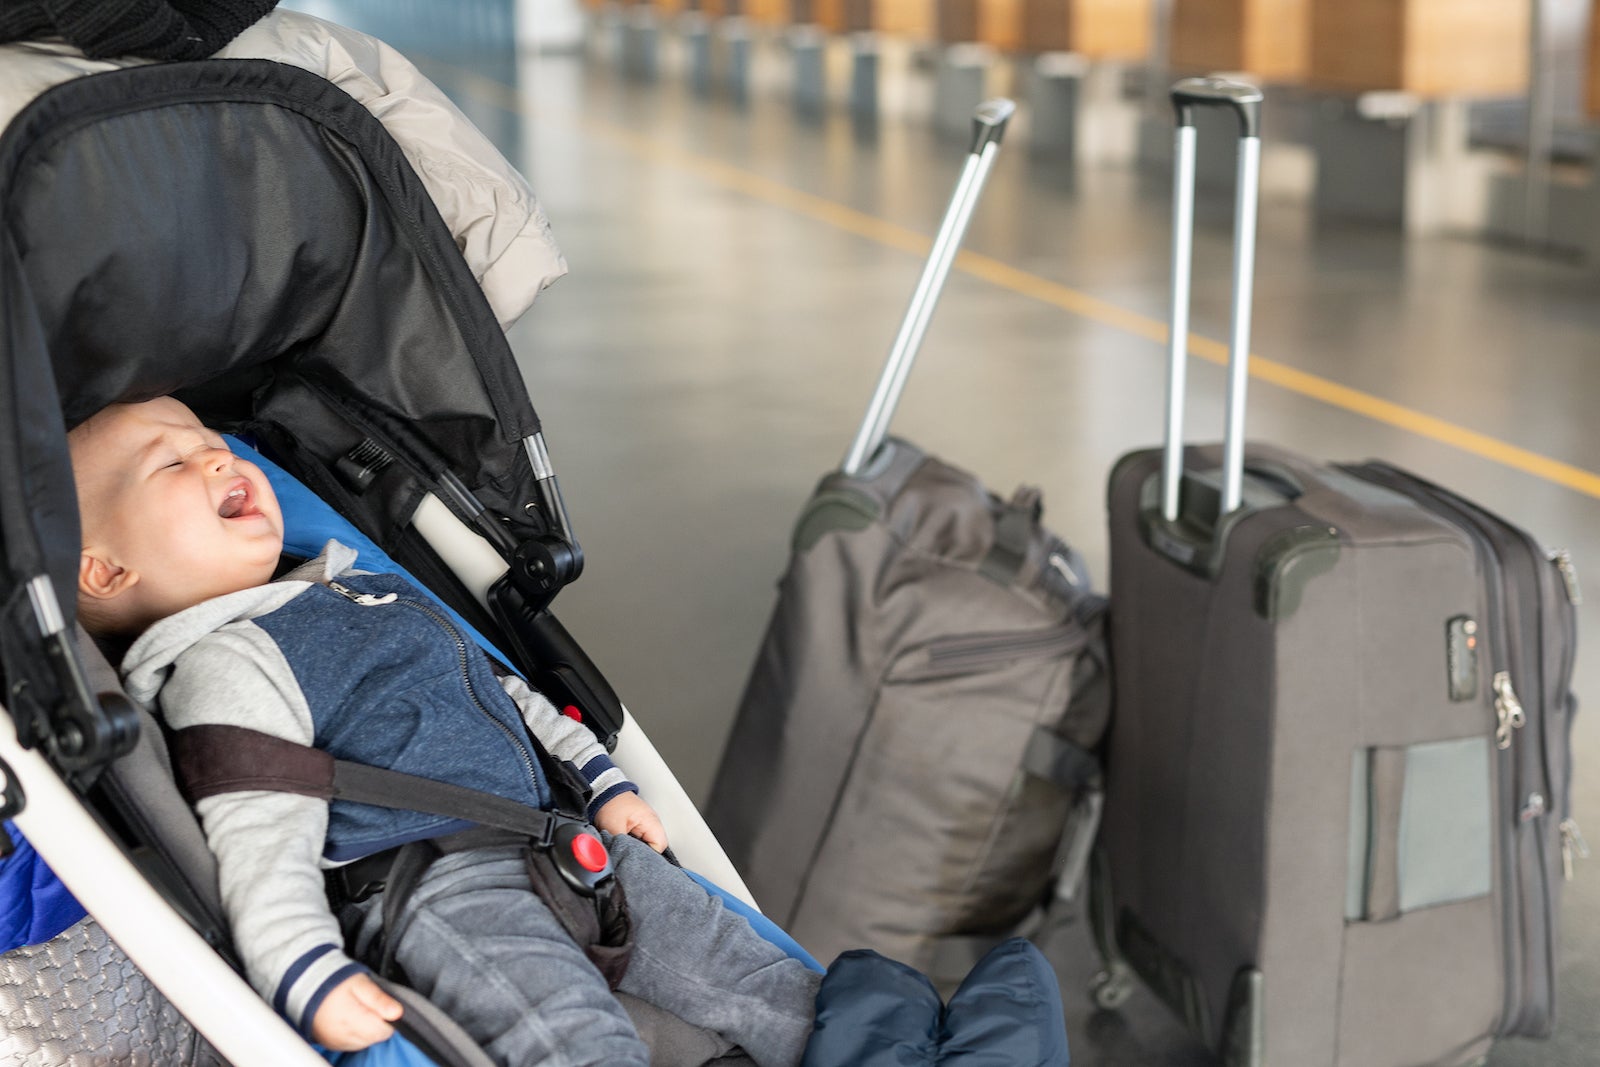 Should planes have child-free zones? This airline thinks so